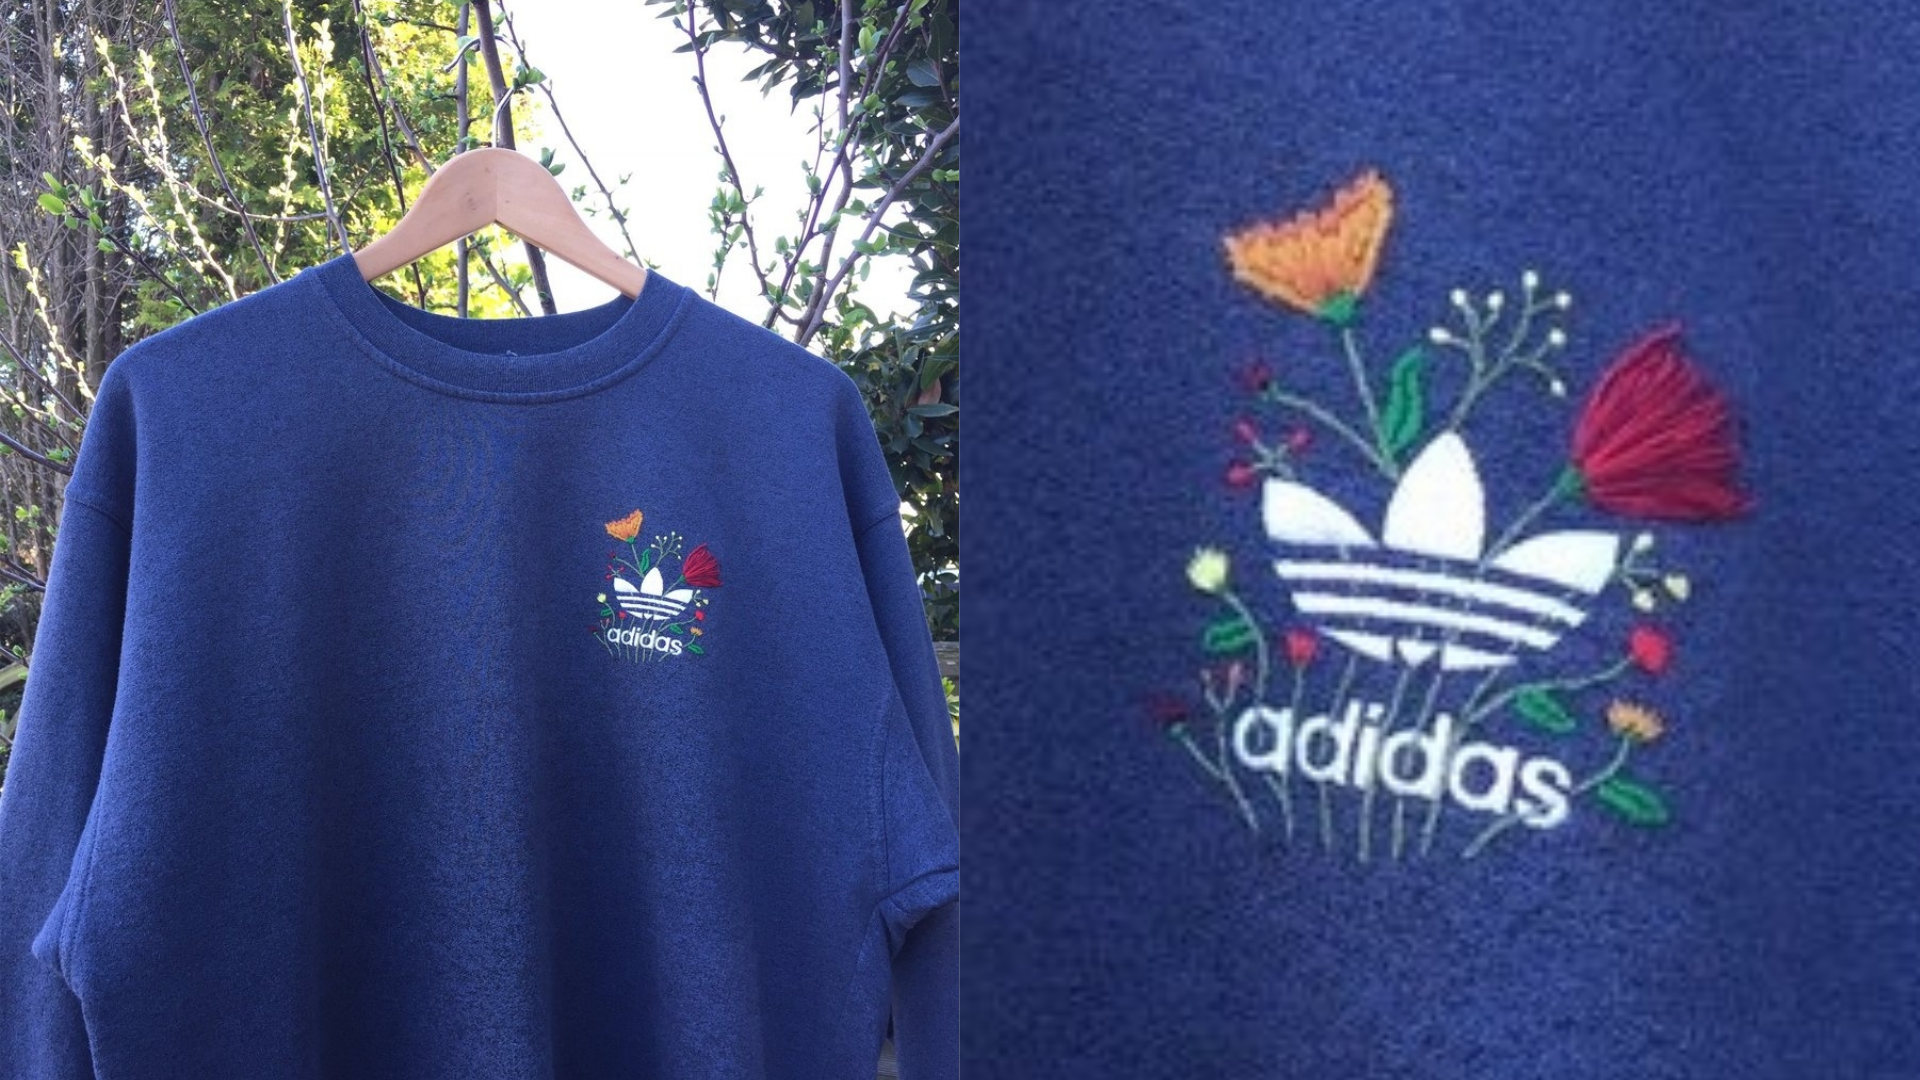 The sweatshirt Shibby embroidered his design onto